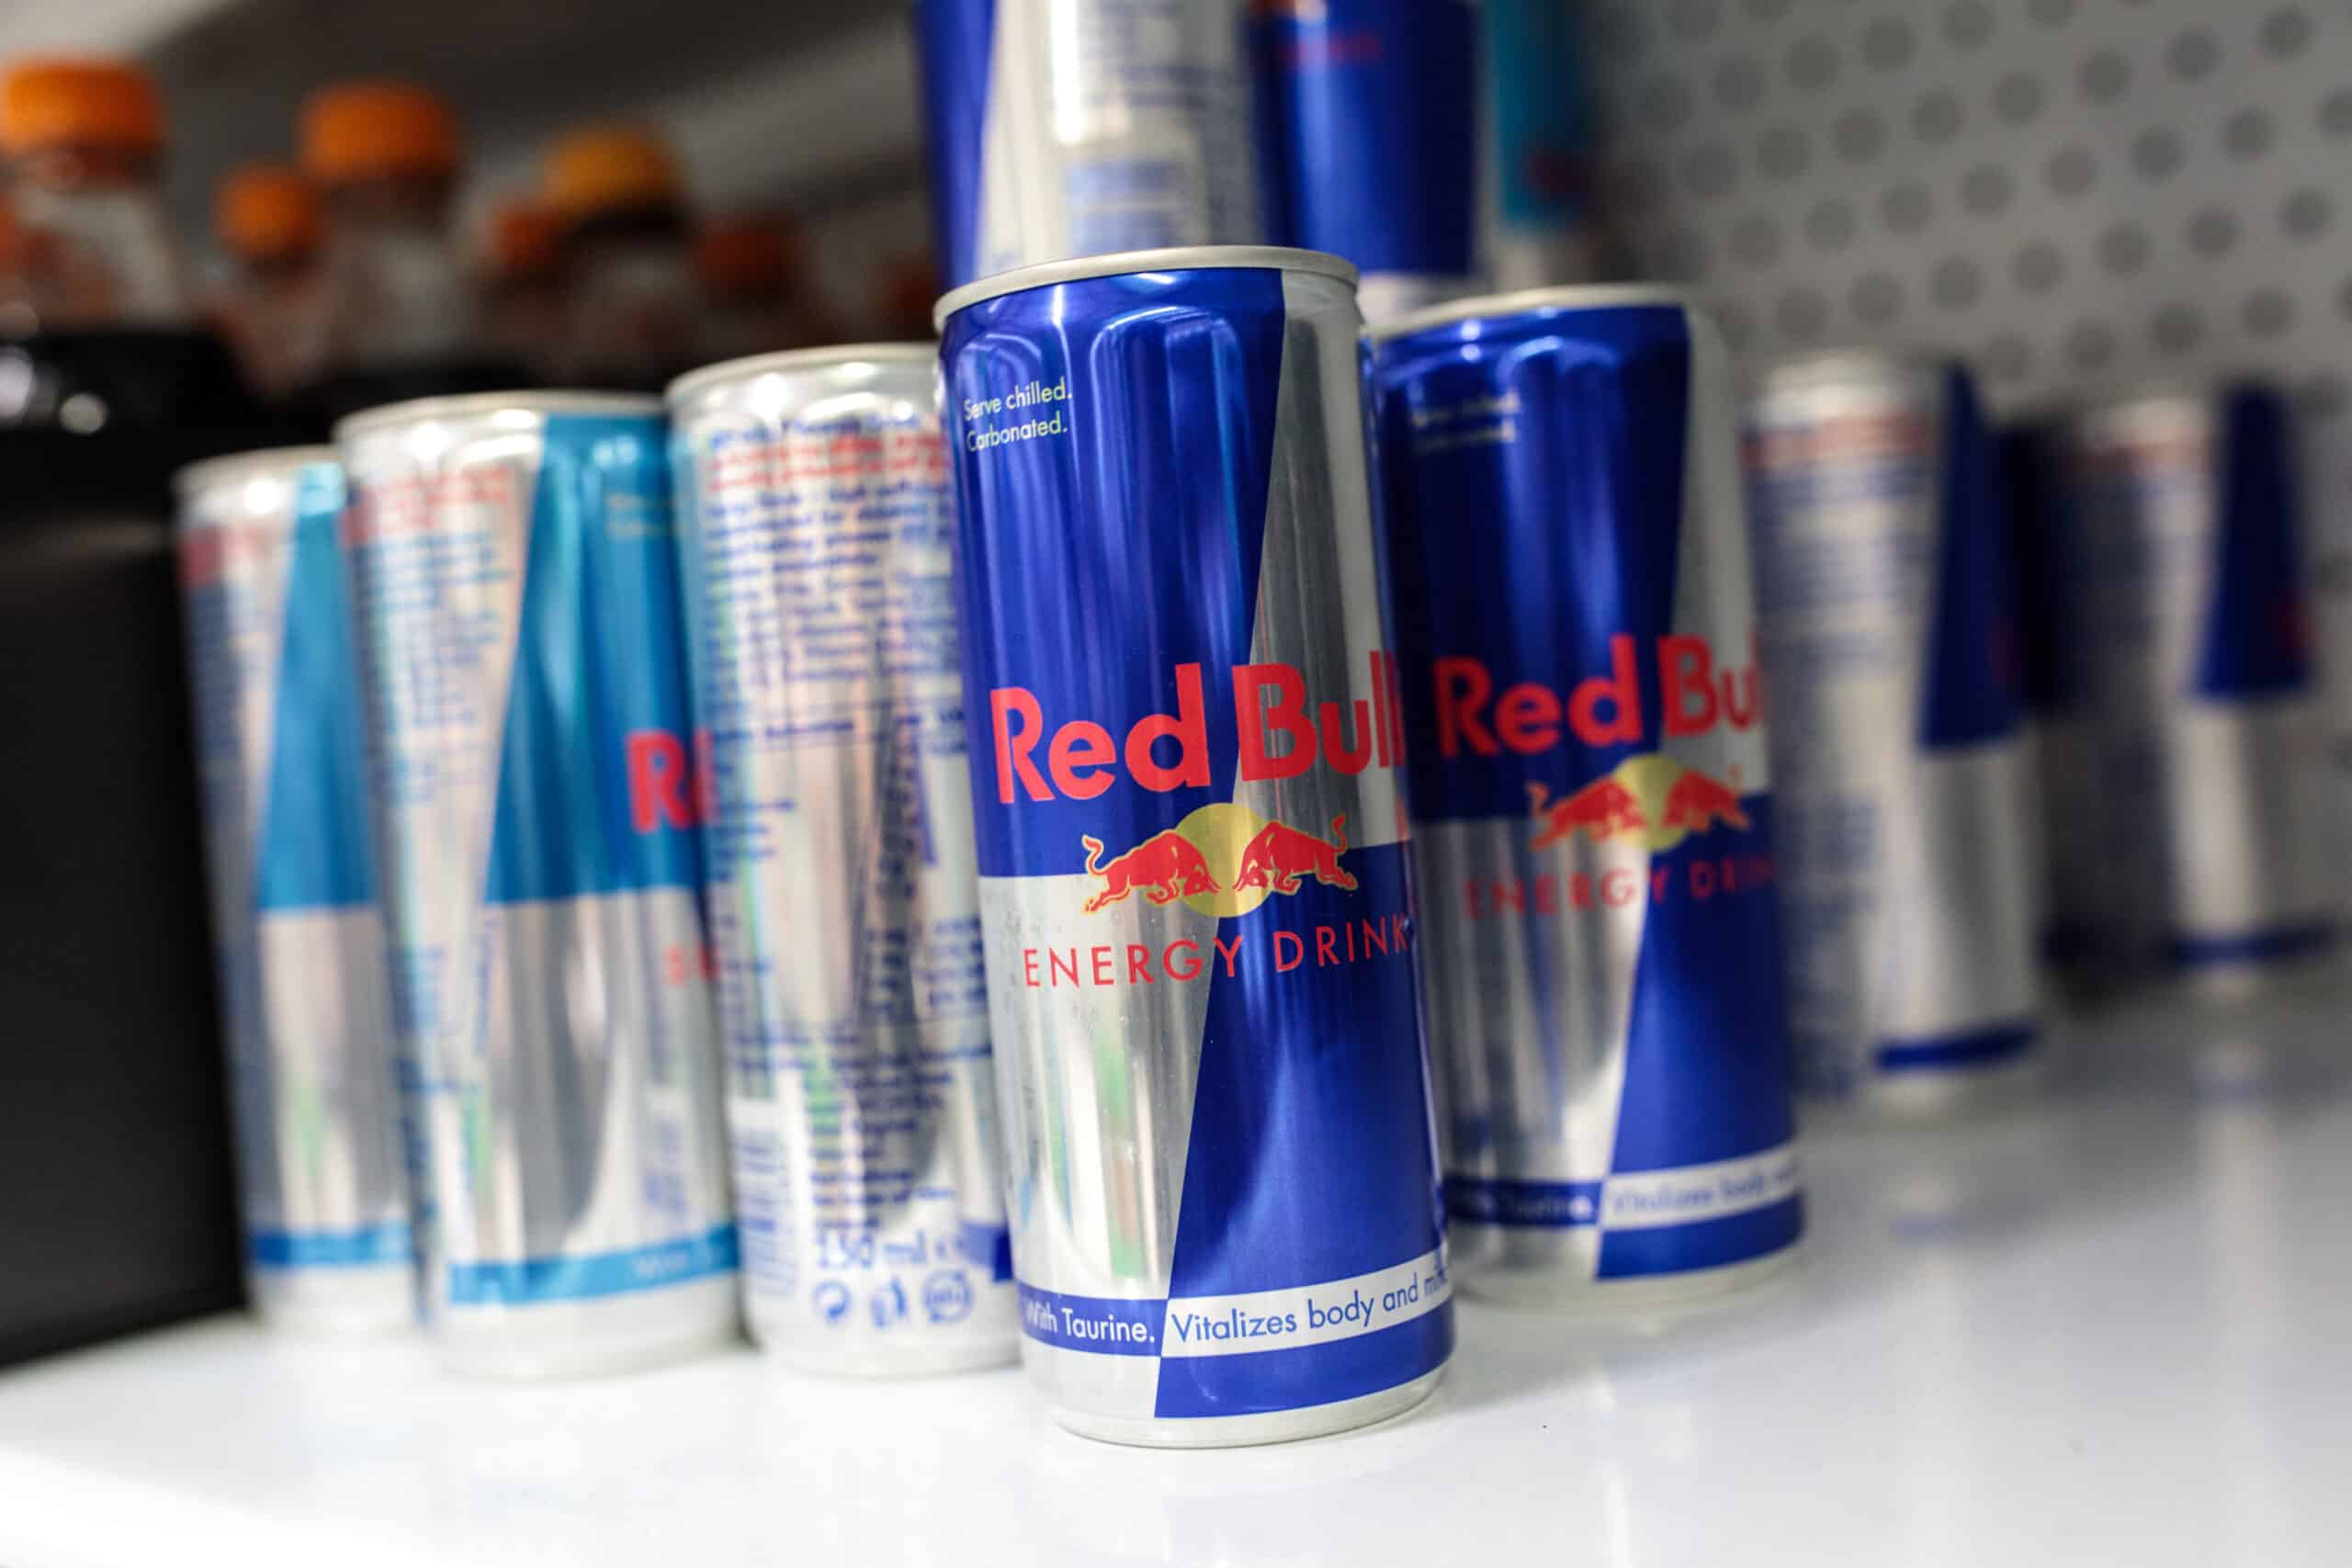 6 Energy Drink Brands to Avoid - 24/7 Wall St.